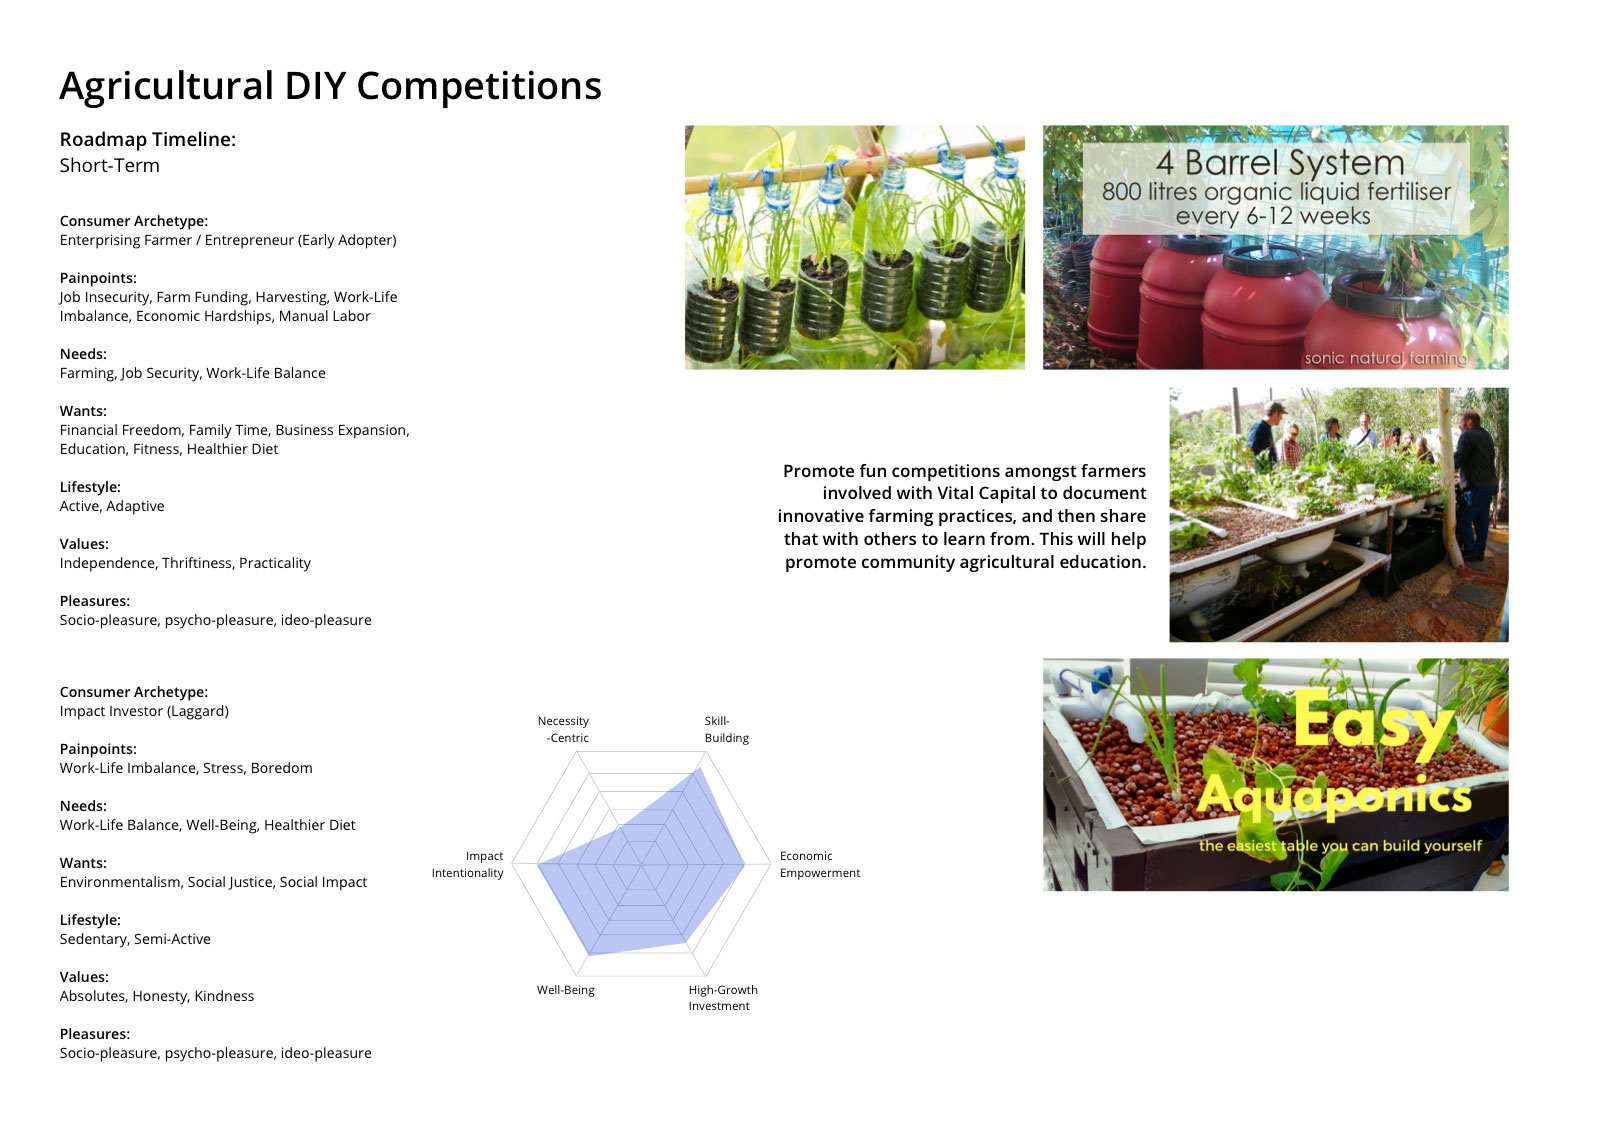 19-Agricultural-DIY-Competitions